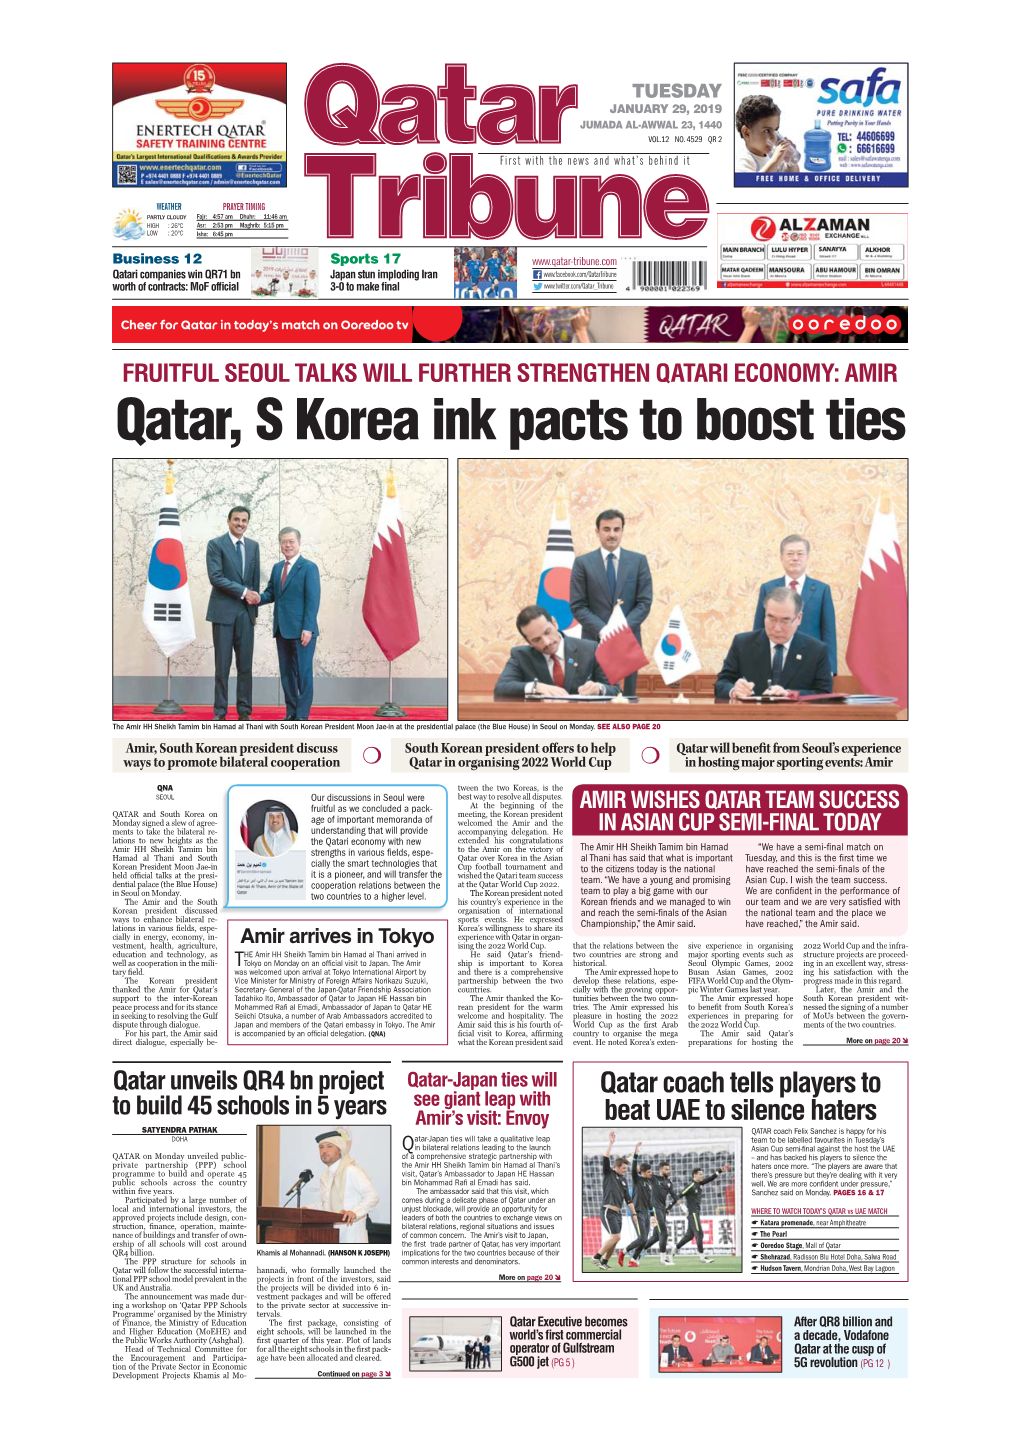 Qatar, S Korea Ink Pacts to Boost Ties